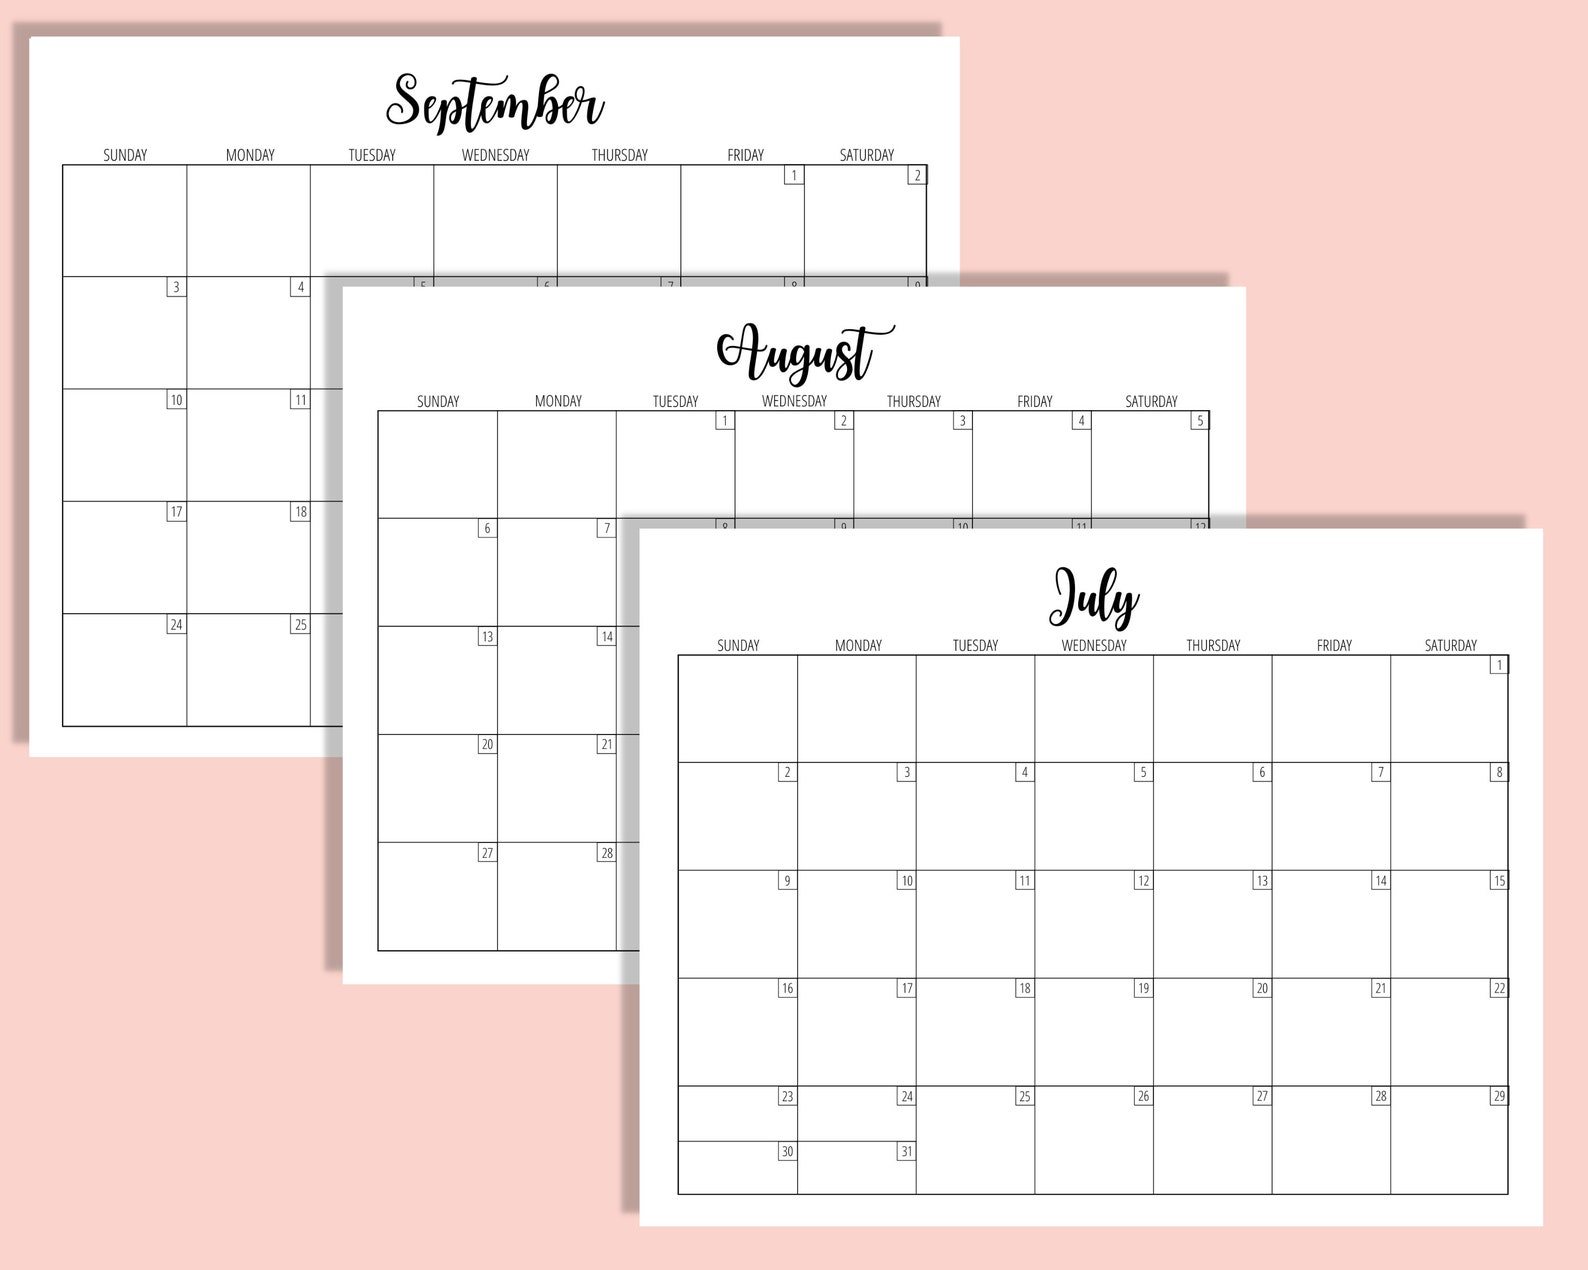 2023 Calendar Template 8.5 X 11 Inches Horizontal Monthly | Etsy intended for Background March Calendar 2023